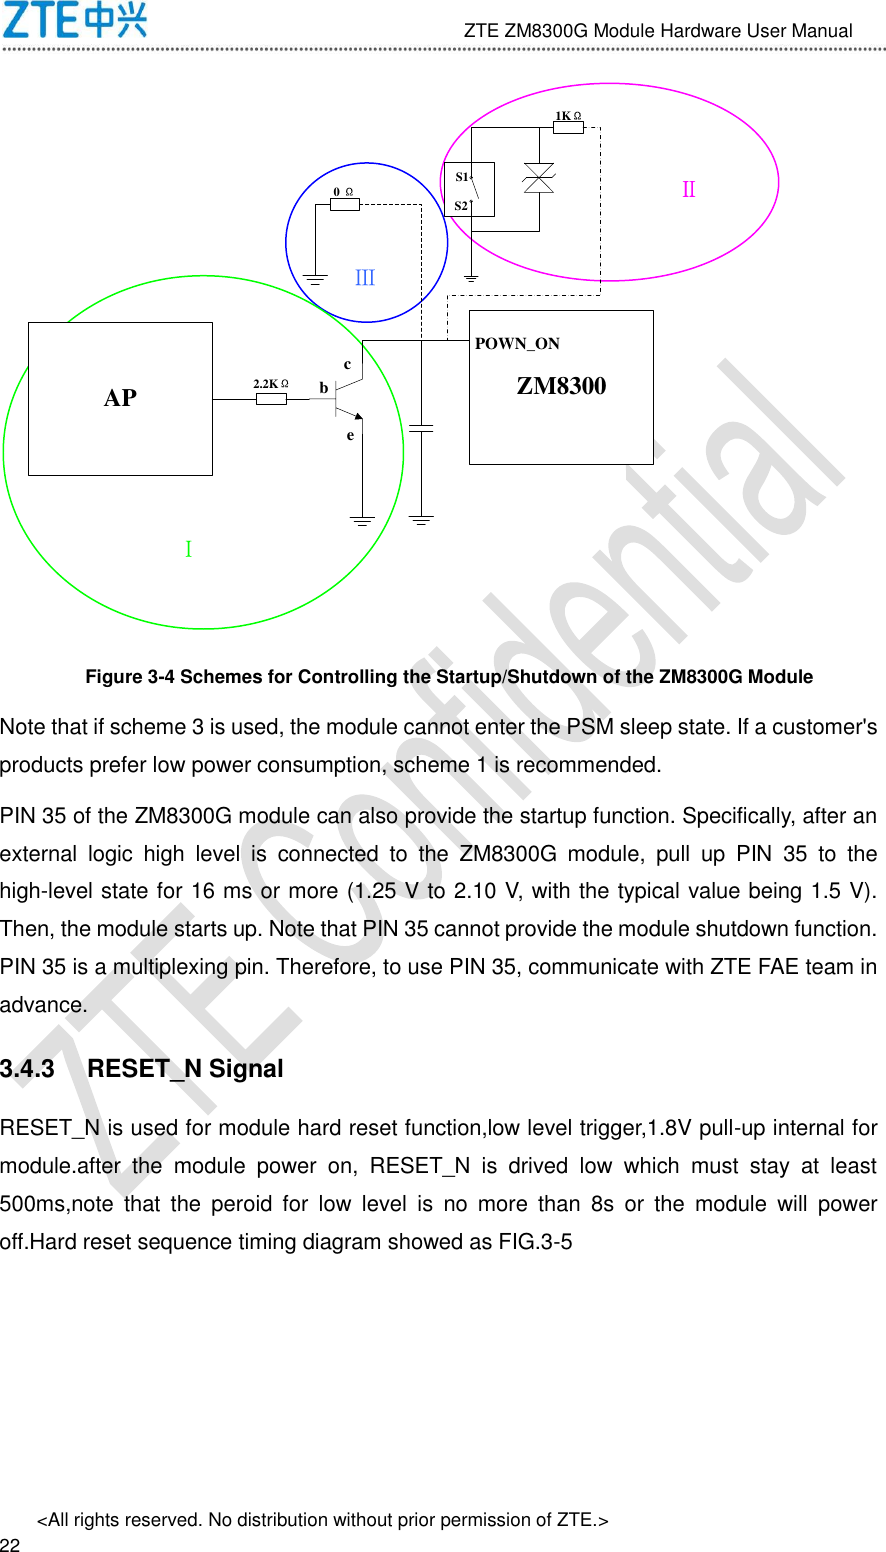                              ZTE ZM8300G Module Hardware User Manual &lt;All rights reserved. No distribution without prior permission of ZTE.&gt;                                                               22 AP ZM8300bcePOWN_ONⅠ ⅢⅡS1S20 Ω2.2KΩ1KΩ Figure 3-4 Schemes for Controlling the Startup/Shutdown of the ZM8300G Module Note that if scheme 3 is used, the module cannot enter the PSM sleep state. If a customer&apos;s products prefer low power consumption, scheme 1 is recommended. PIN 35 of the ZM8300G module can also provide the startup function. Specifically, after an external  logic  high  level  is  connected  to  the  ZM8300G  module,  pull  up  PIN  35  to  the high-level state for 16 ms or more (1.25 V to 2.10 V, with the typical value being 1.5 V). Then, the module starts up. Note that PIN 35 cannot provide the module shutdown function. PIN 35 is a multiplexing pin. Therefore, to use PIN 35, communicate with ZTE FAE team in advance. 3.4.3  RESET_N Signal RESET_N is used for module hard reset function,low level trigger,1.8V pull-up internal for module.after  the  module  power  on,  RESET_N  is  drived  low  which  must  stay  at  least 500ms,note  that  the  peroid  for  low  level  is  no  more  than  8s  or  the  module  will  power off.Hard reset sequence timing diagram showed as FIG.3-5 